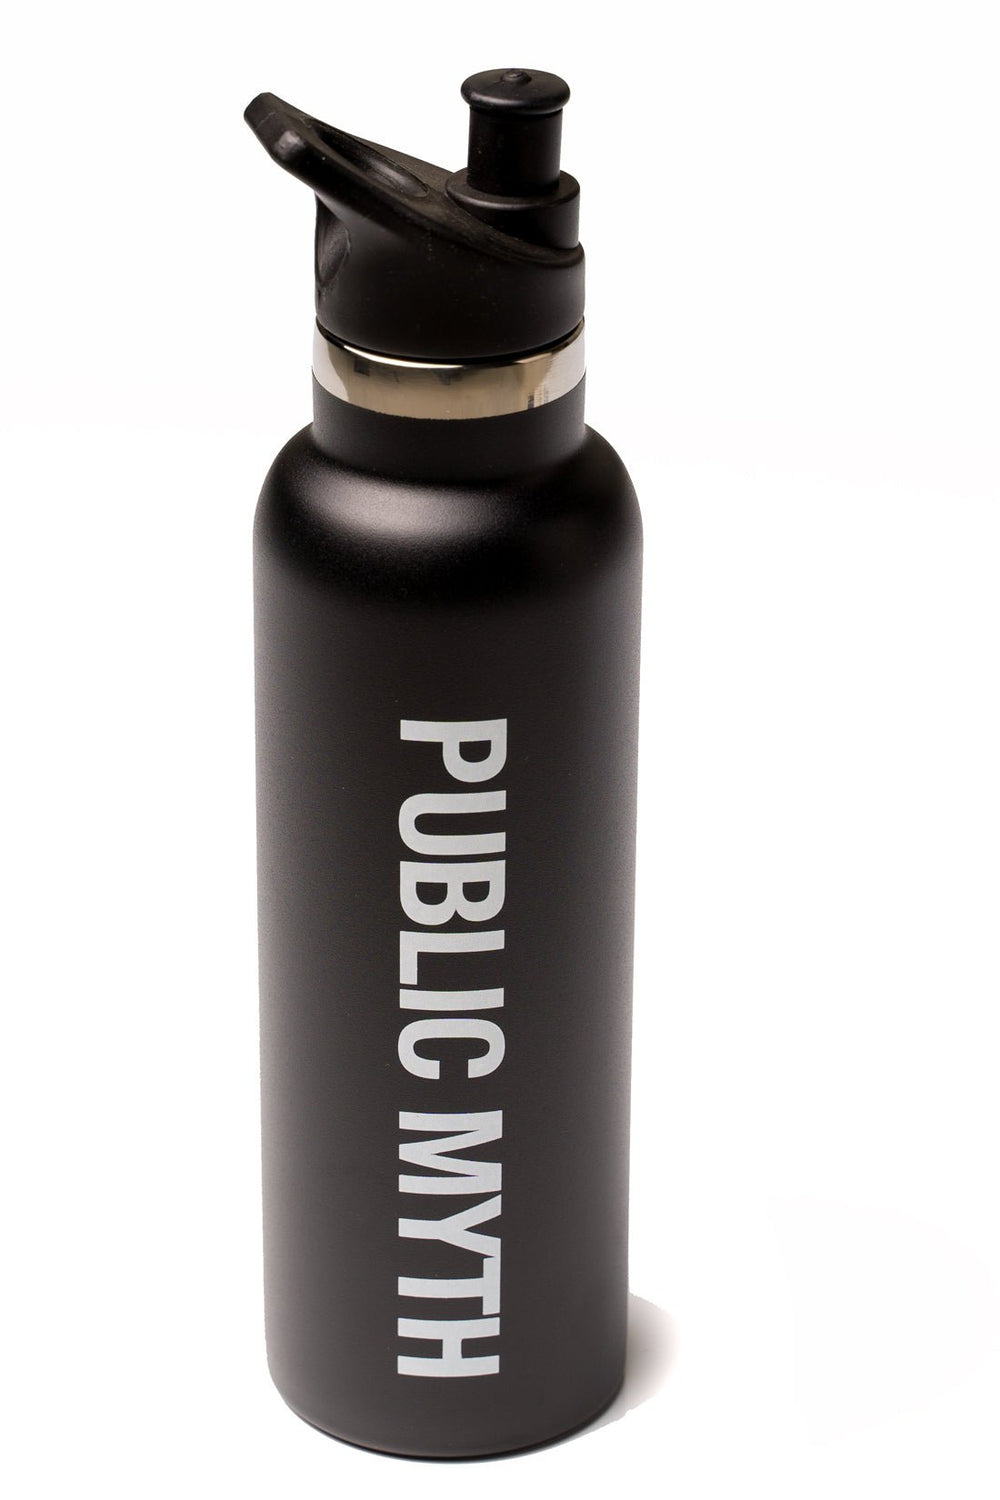 Public Myth insulated stainless steel water bottle with qiuck open spout 